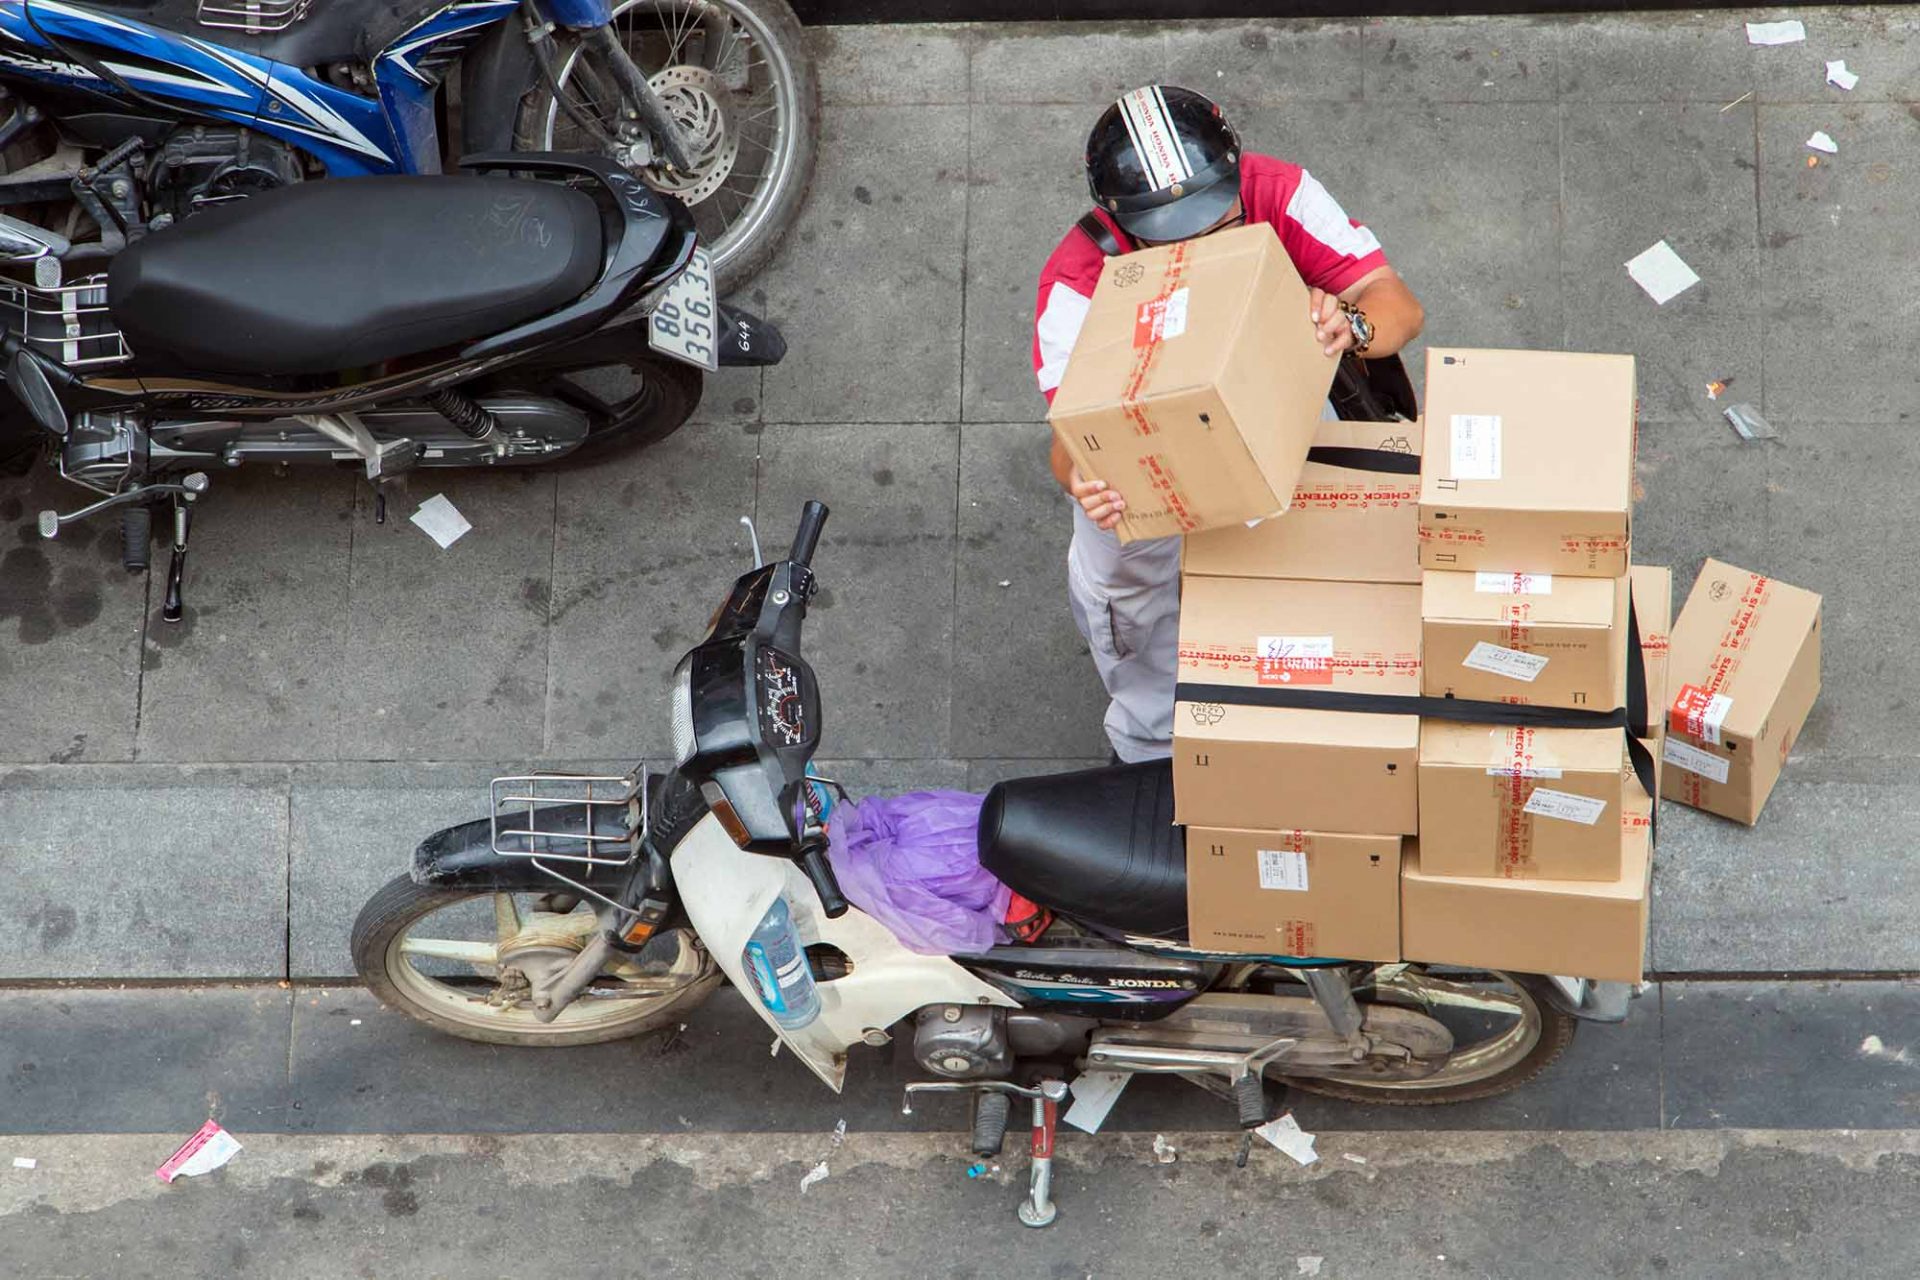 SAIGON, VIETNAM, DEC 13 2017, Delivery Of Consignments On Motorbike. Motorcyclist With The Many Packet On Motorcycle At Street Saigon City, Vietnam.